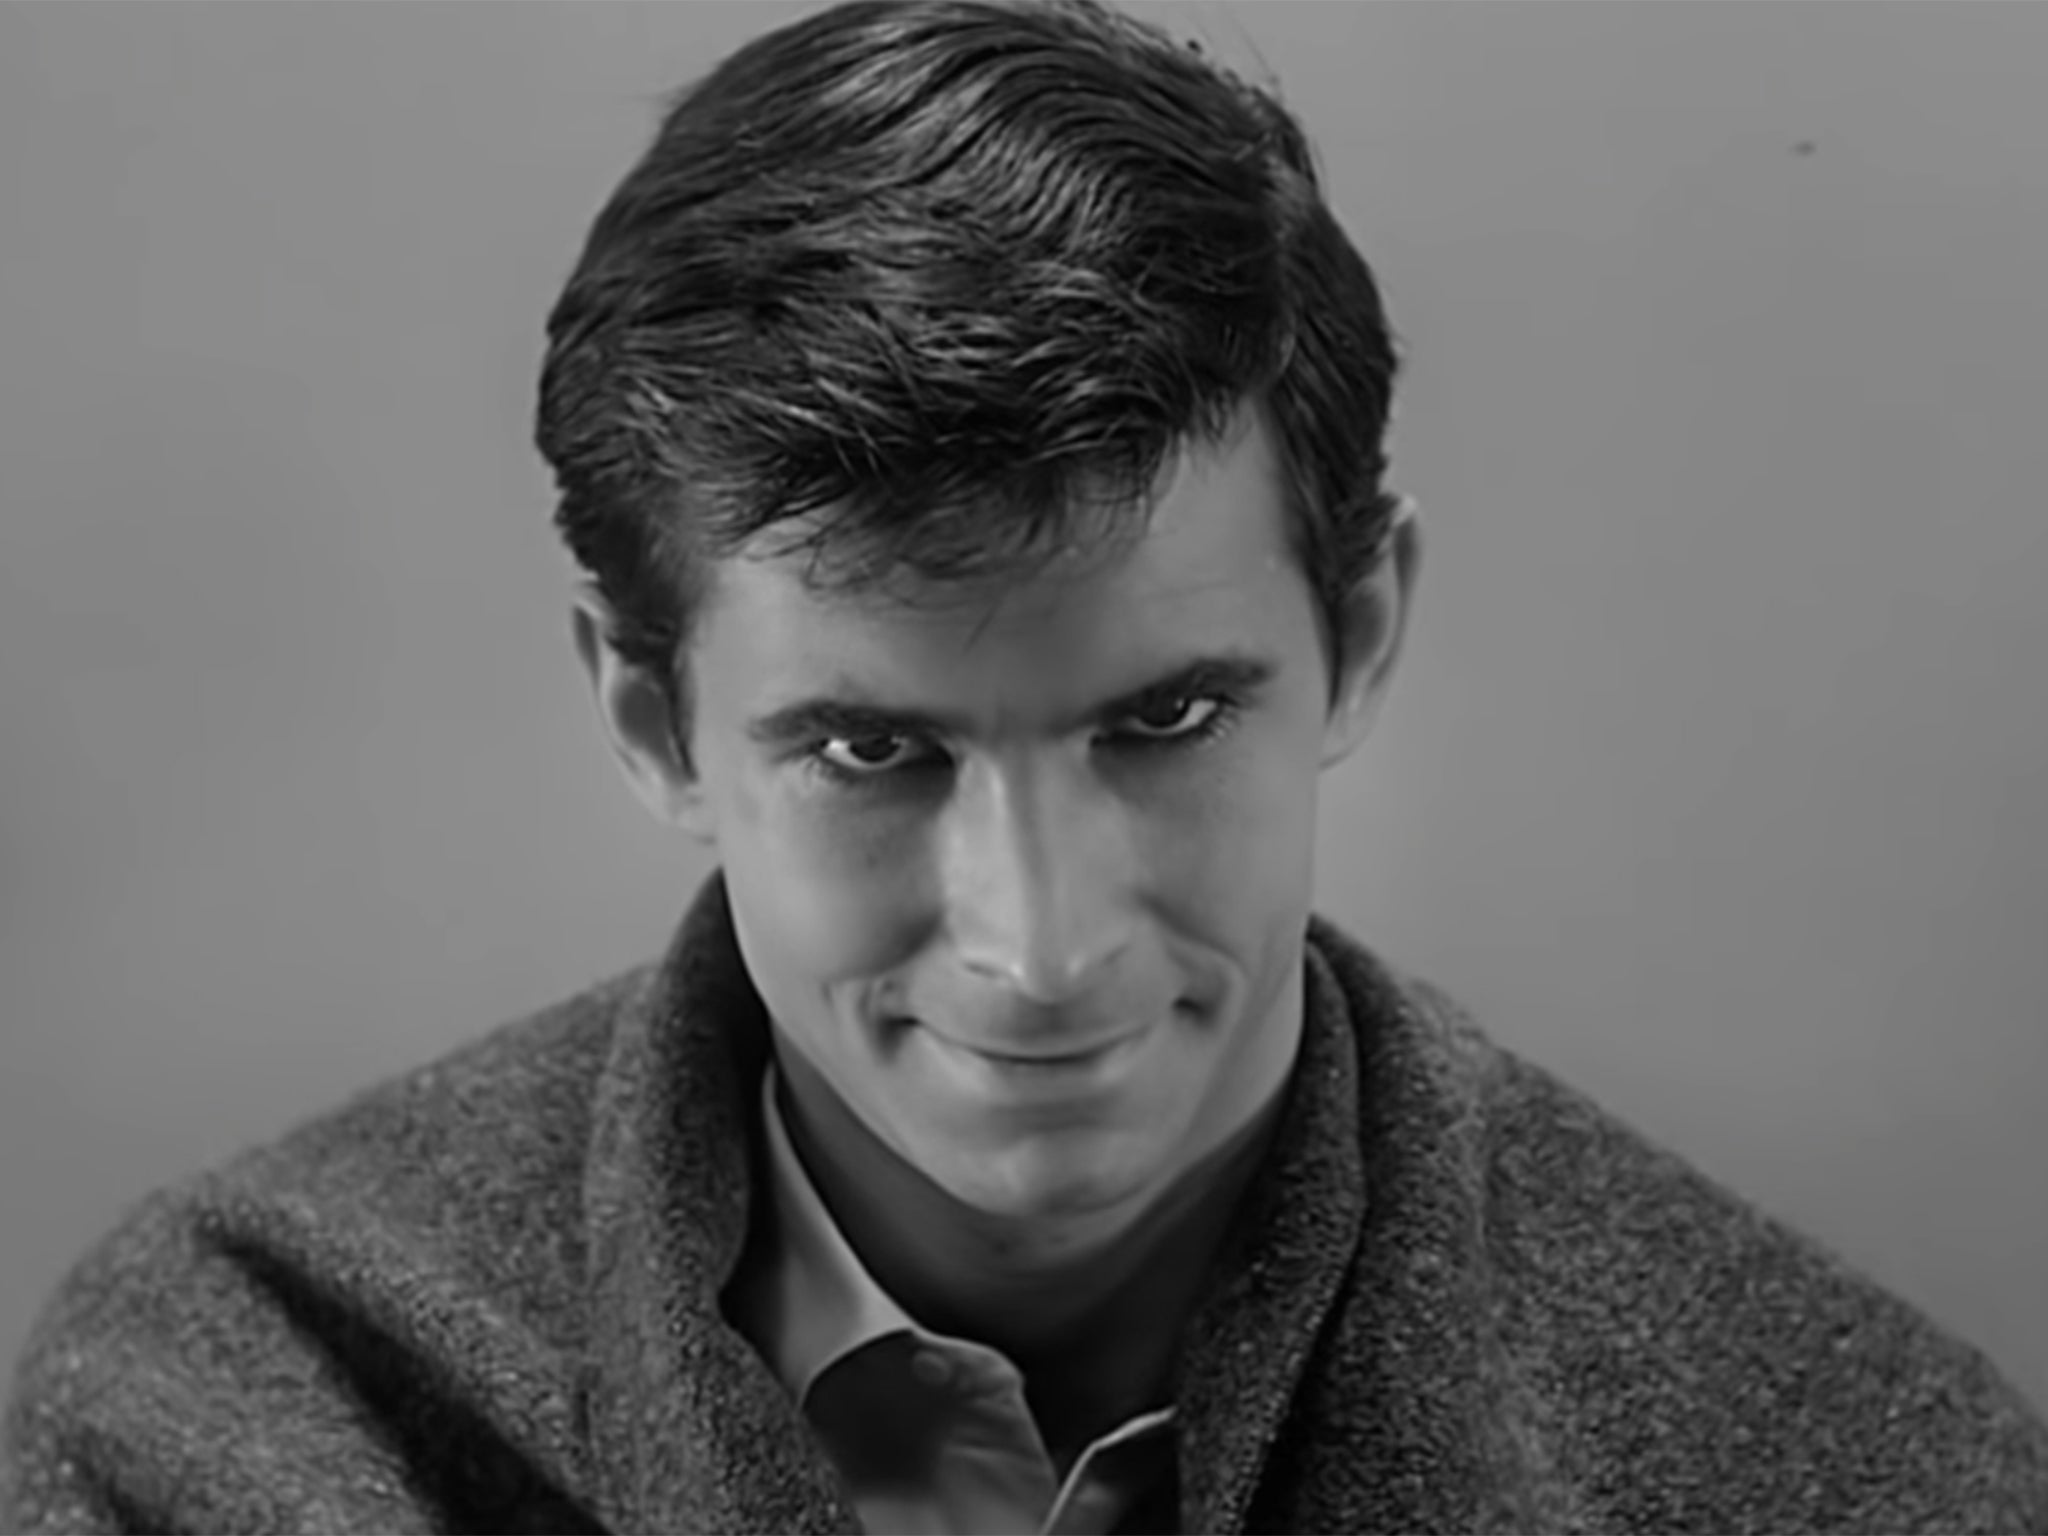 Anthony Perkins played Norman Bates in Alfred Hitchcok’s ‘Psycho’ and its three sequels